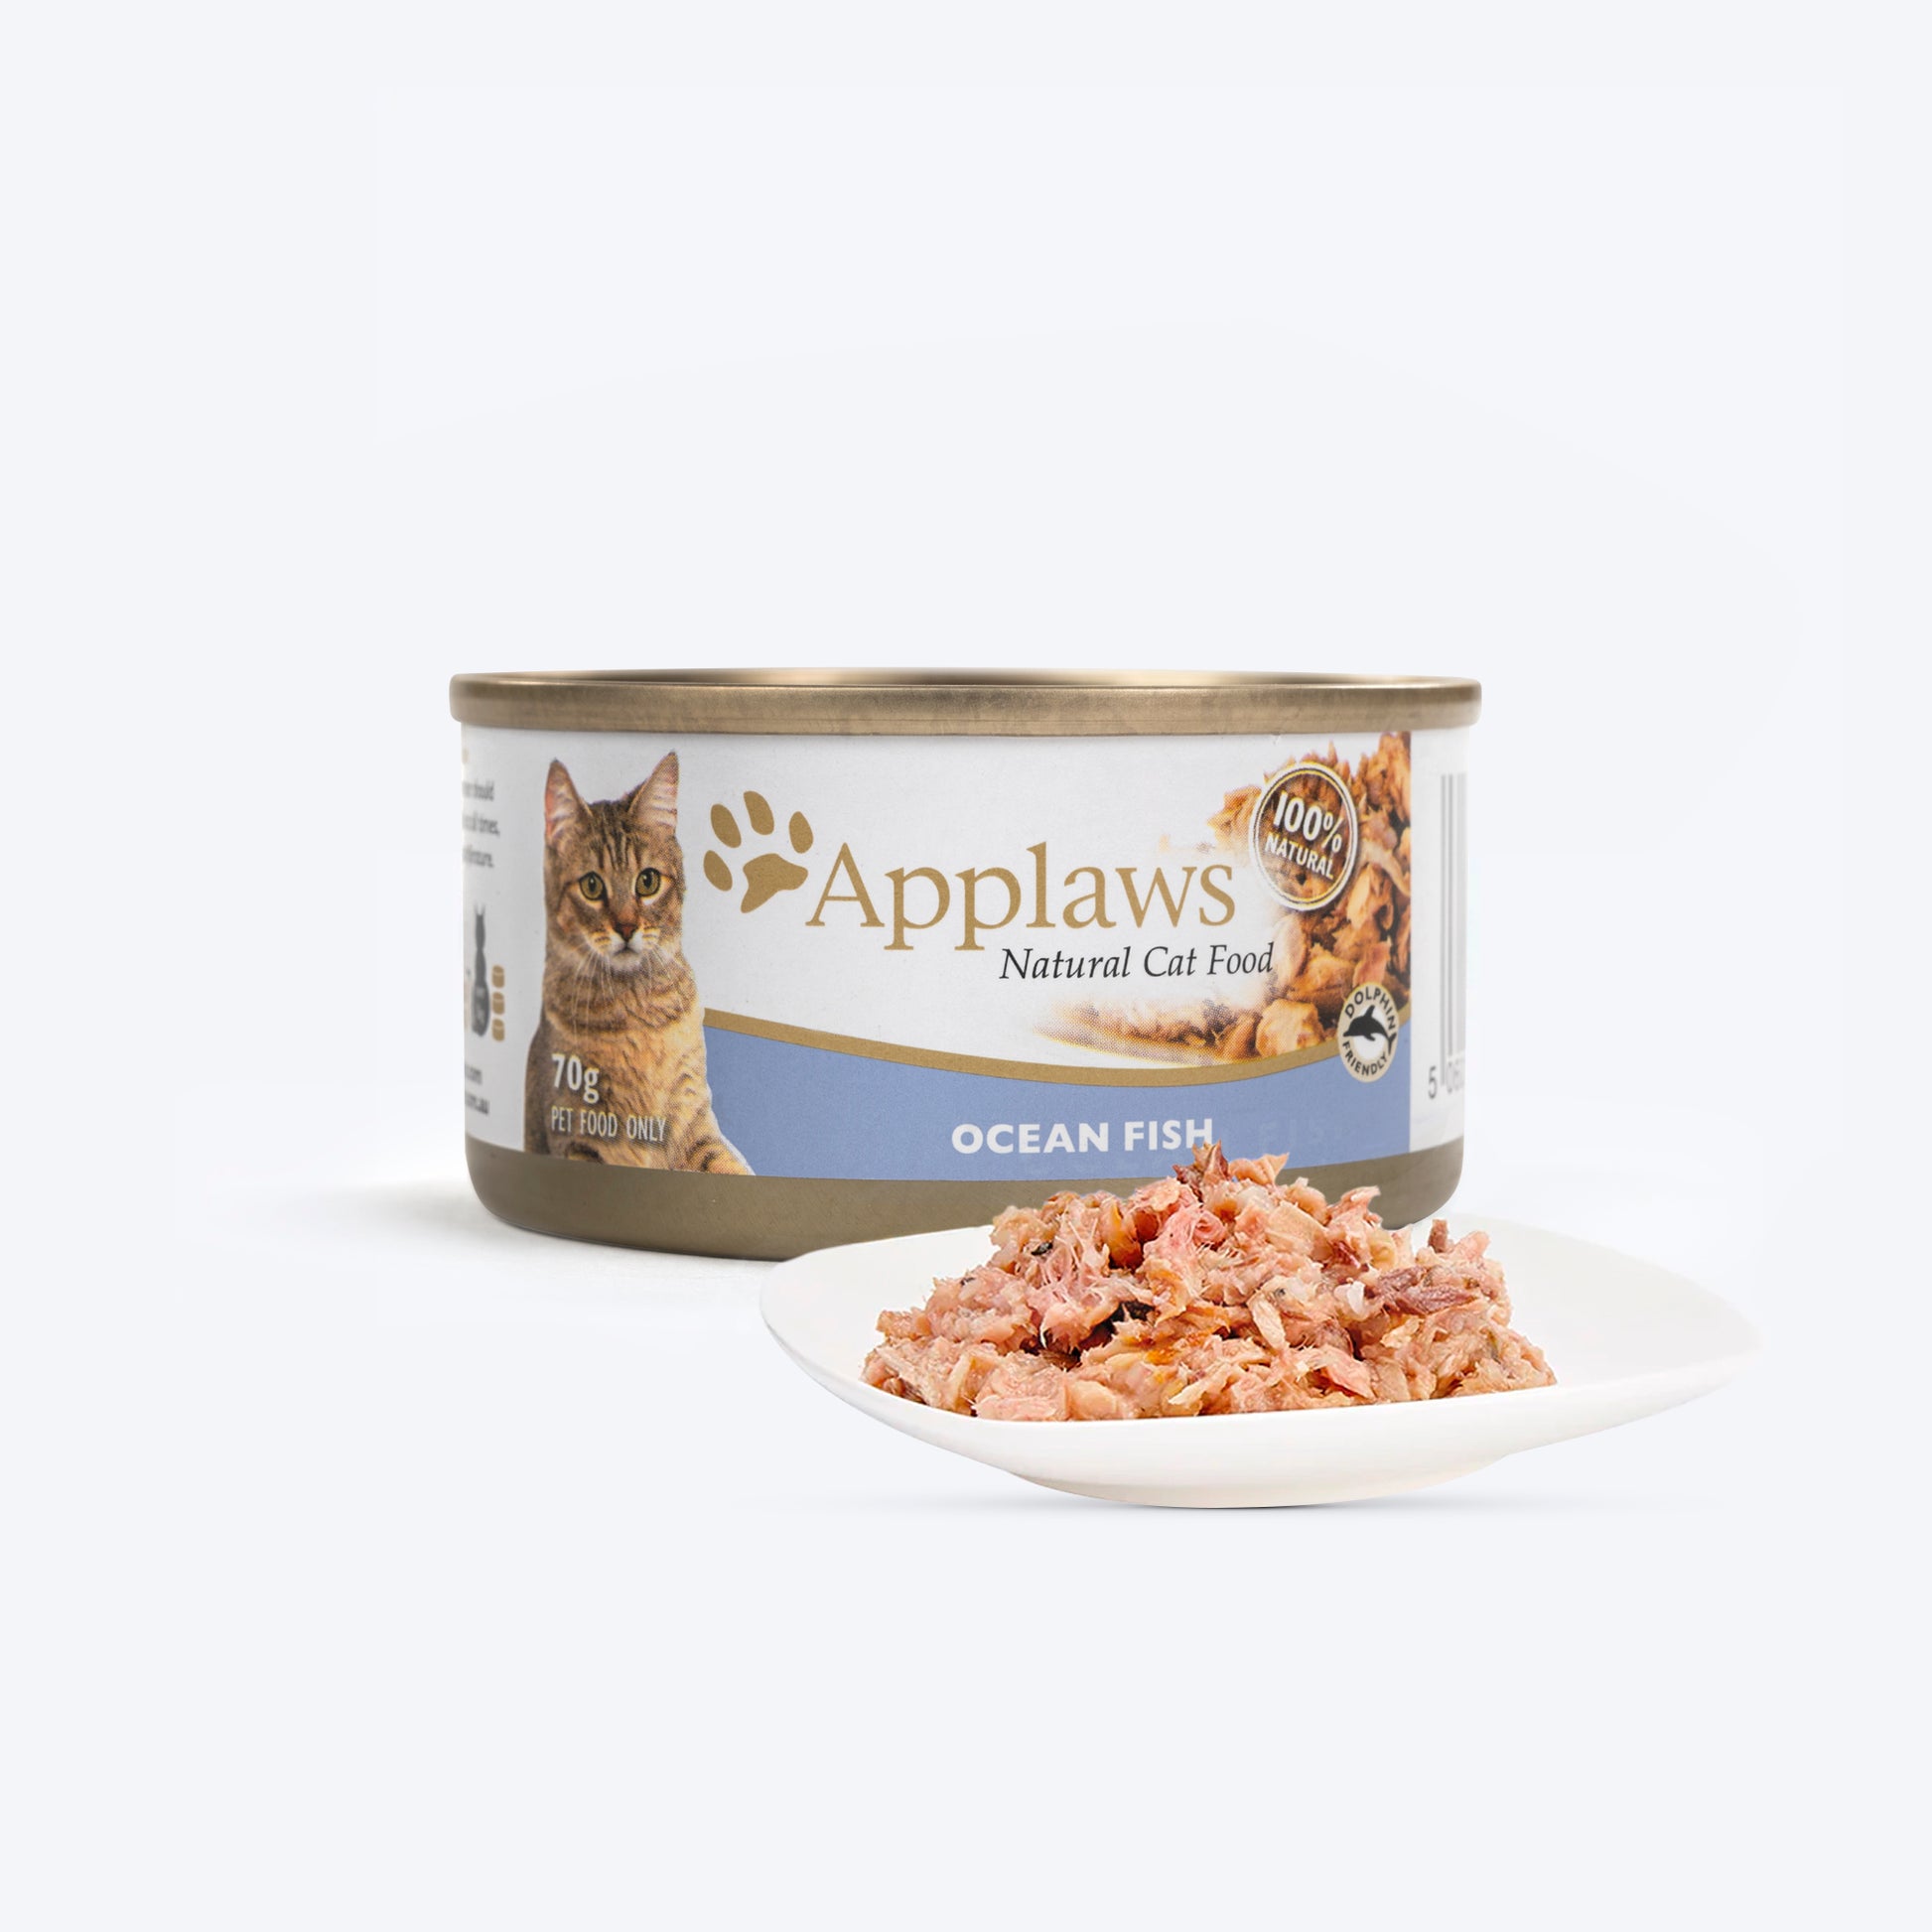 Applaws Ocean Fish Natural Wet Cat Food - 70 g - Heads Up For Tails